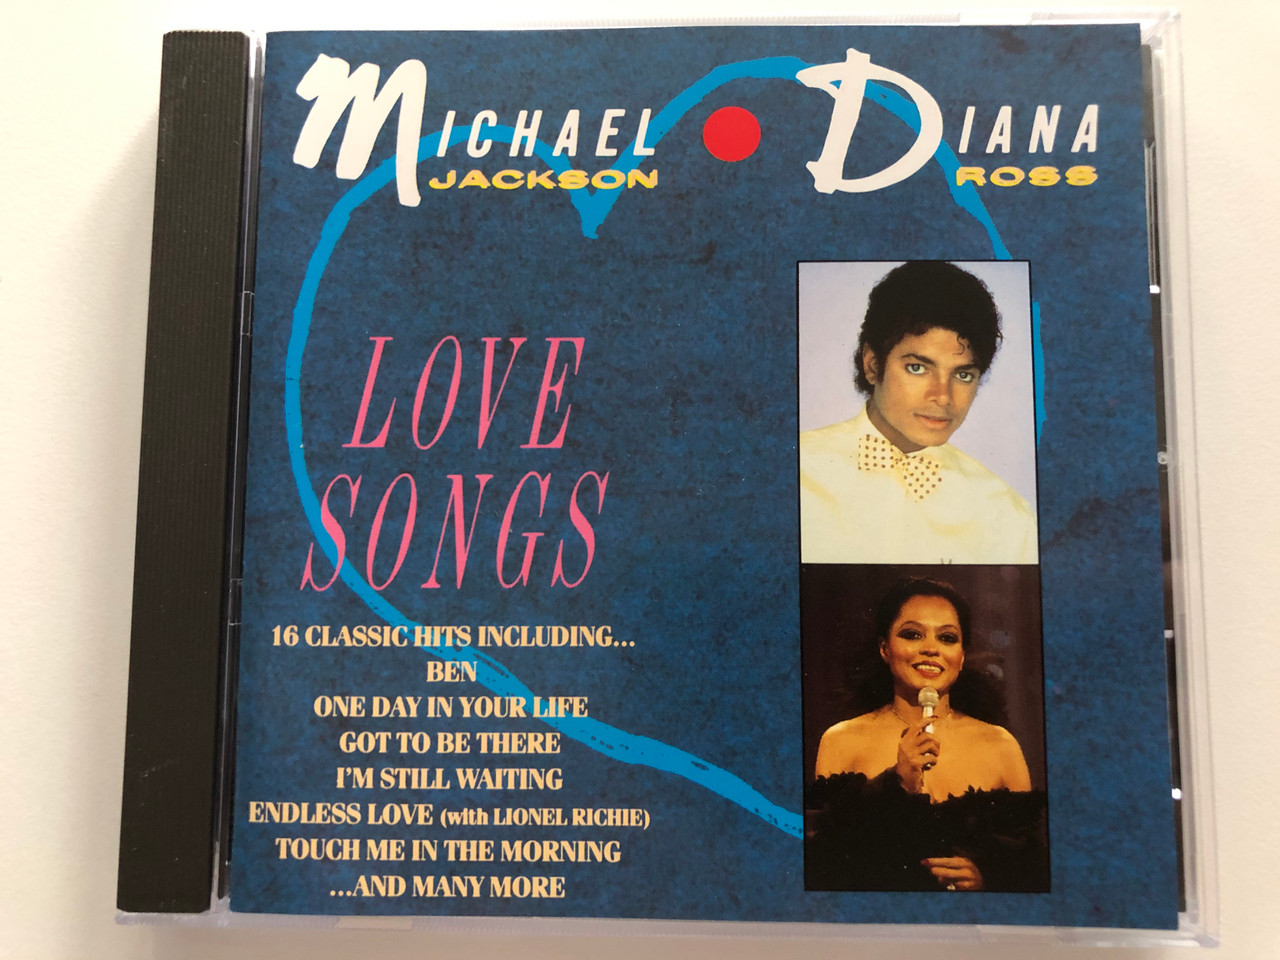 https://cdn10.bigcommerce.com/s-62bdpkt7pb/products/29332/images/174948/Michael_Jackson_Diana_Ross_Love_Songs_16_Classic_Hits_Including..._Ben_One_Day_In_Your_Life_Got_To_Be_There_Im_Still_Waiting_Endless_Love_with_Lionel_Richie_Touch_Me_In_The_Mornin_1__46468.1618312889.1280.1280.JPG?c=2&_ga=2.201285229.2134474457.1618319212-1214595420.1618319212